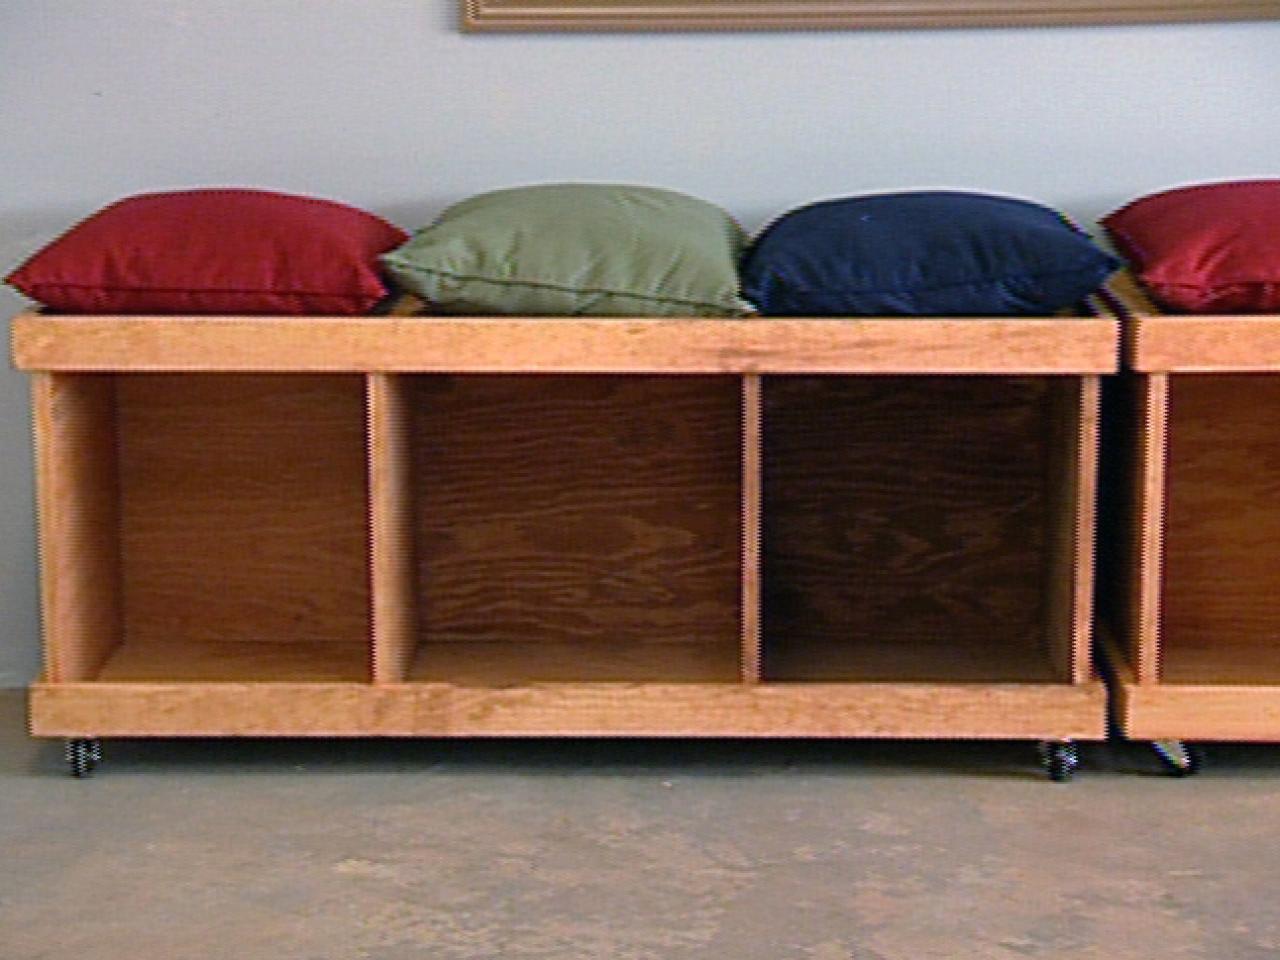 How To Build A Rolling Storage Bench, Bench Seat With Storage Plans